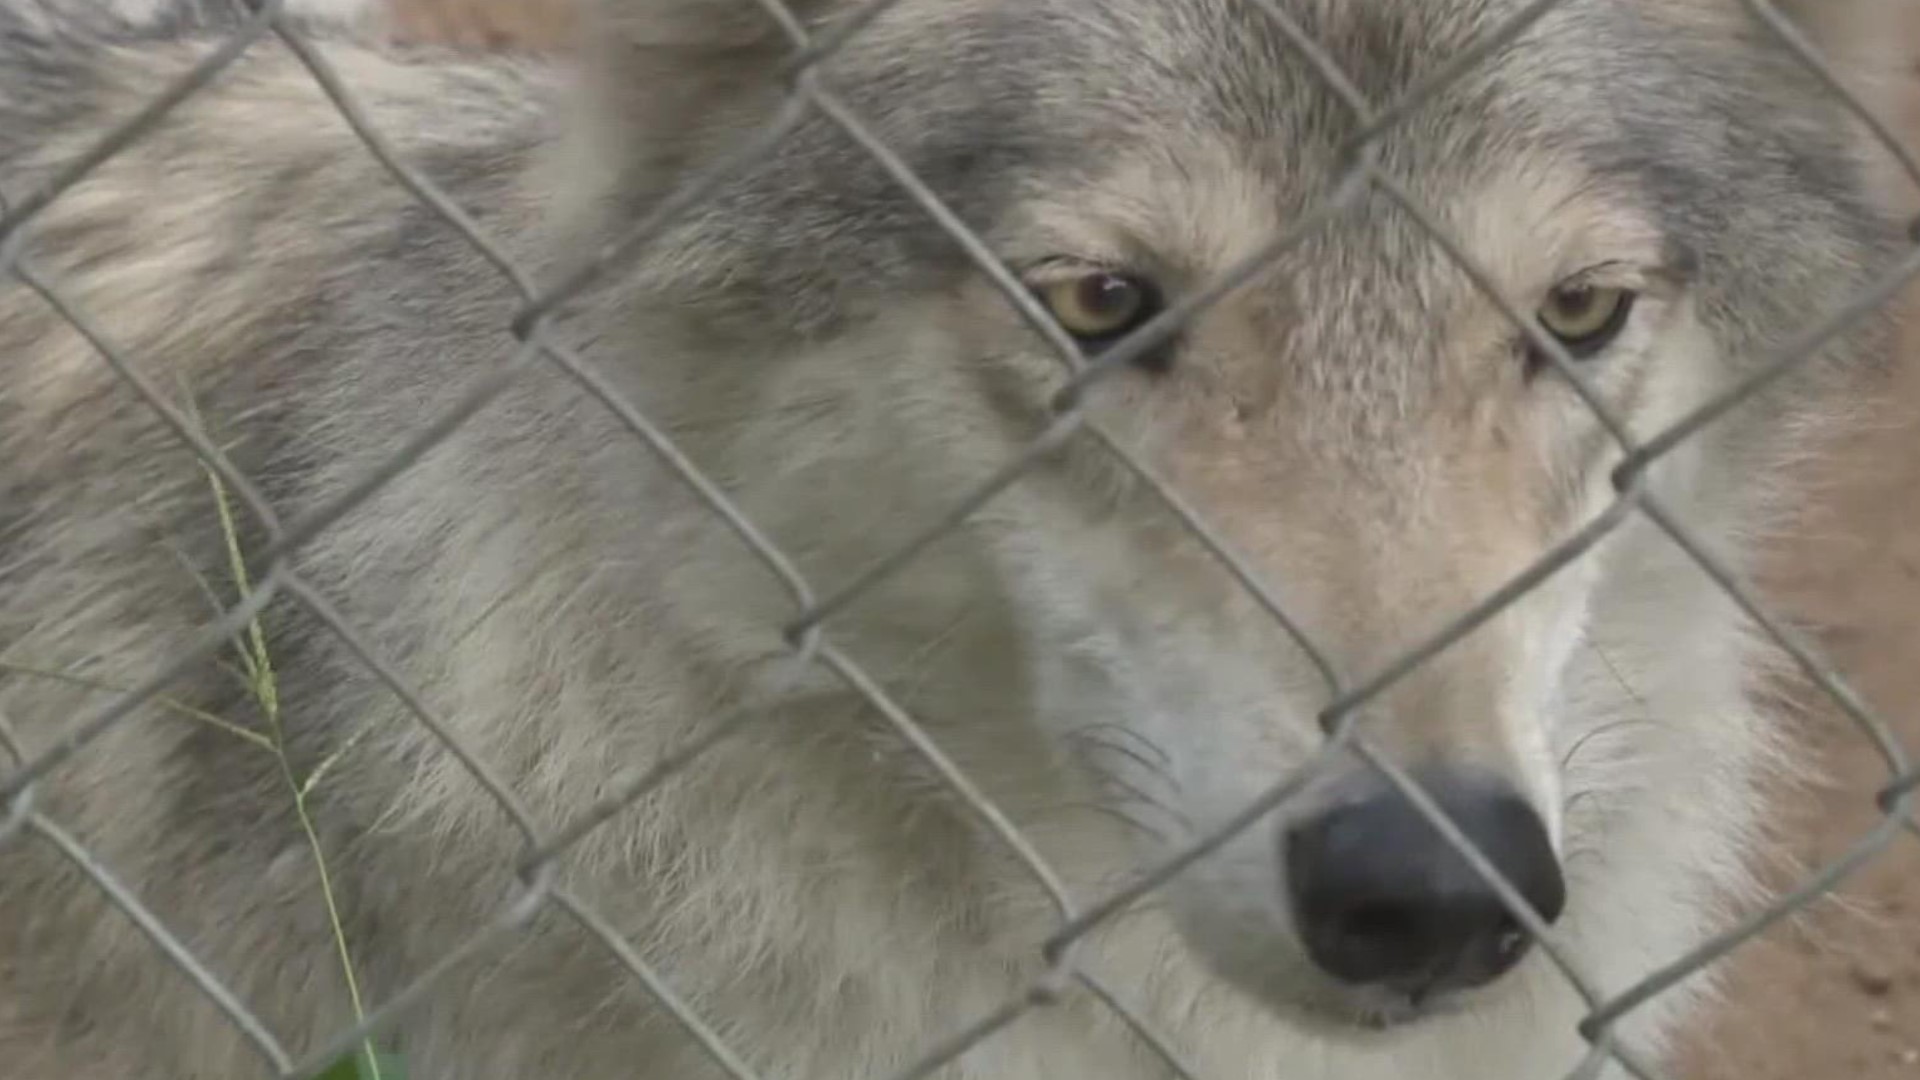 In Muskegon County, a civil case in circuit court could determine what happens to dozens of wolf dogs currently housed at an exotic animal sanctuary.